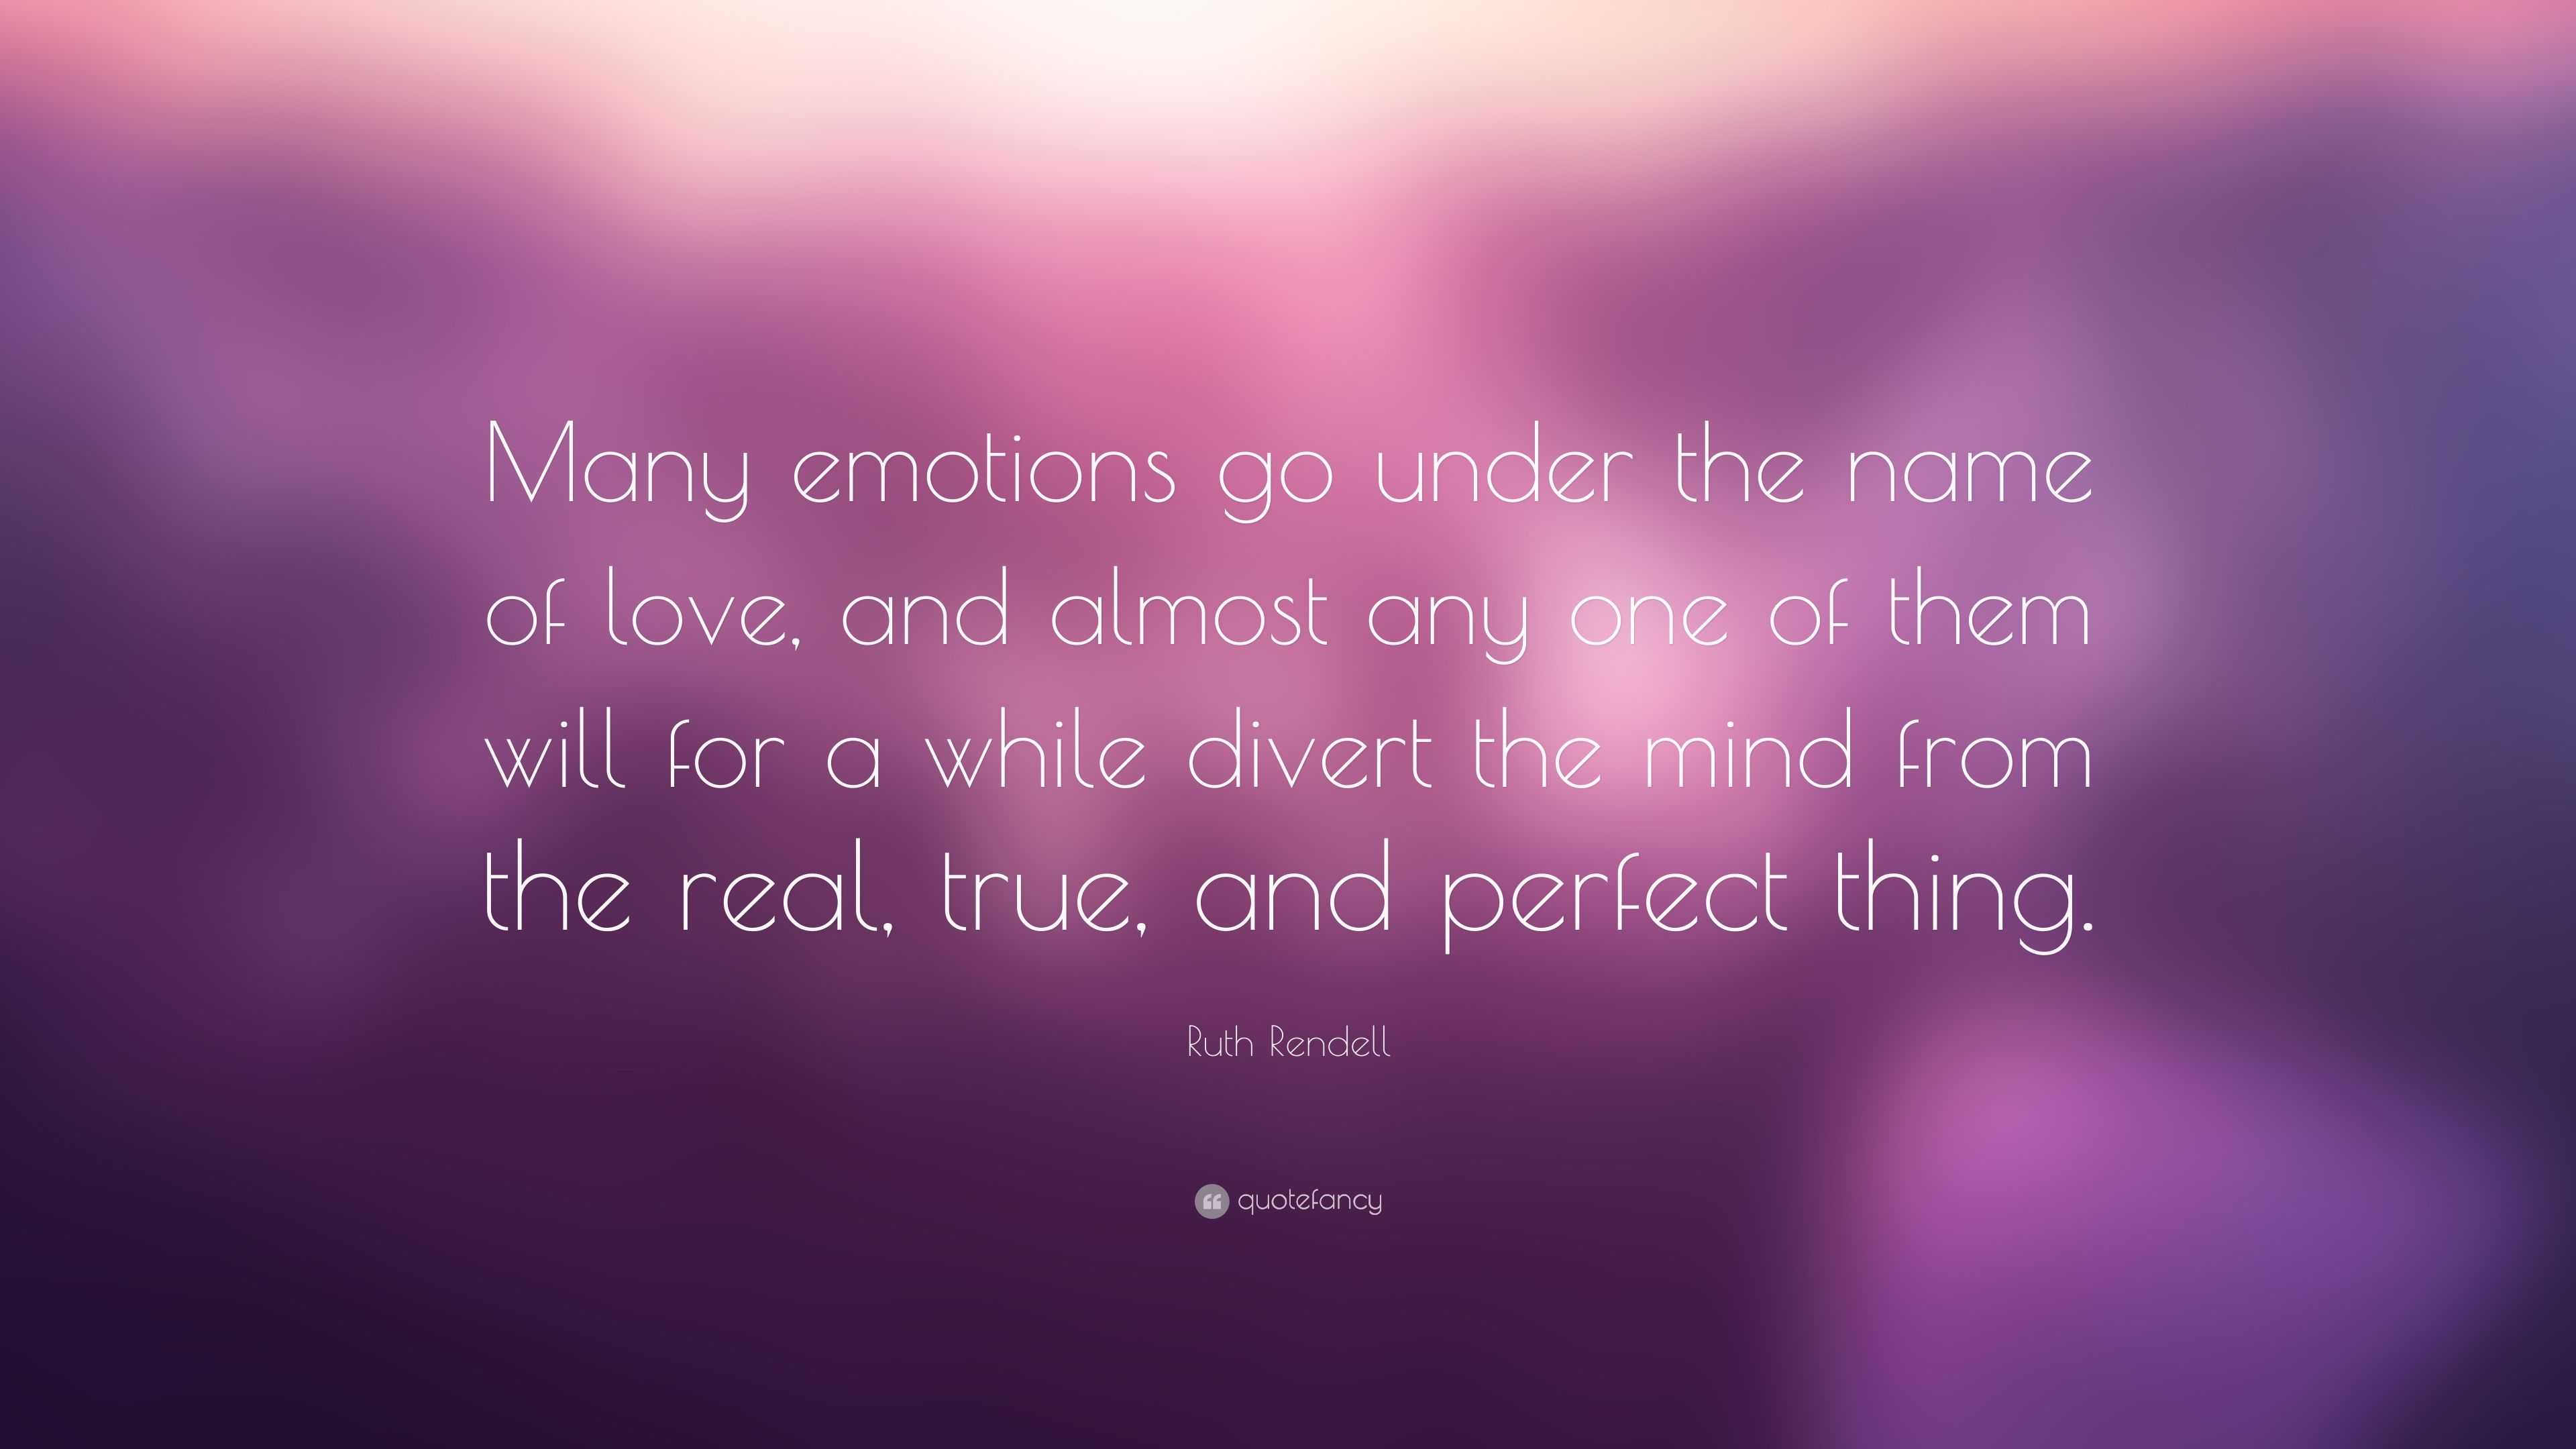 Ruth Rendell Quote: “Many emotions go under the name of love, and ...